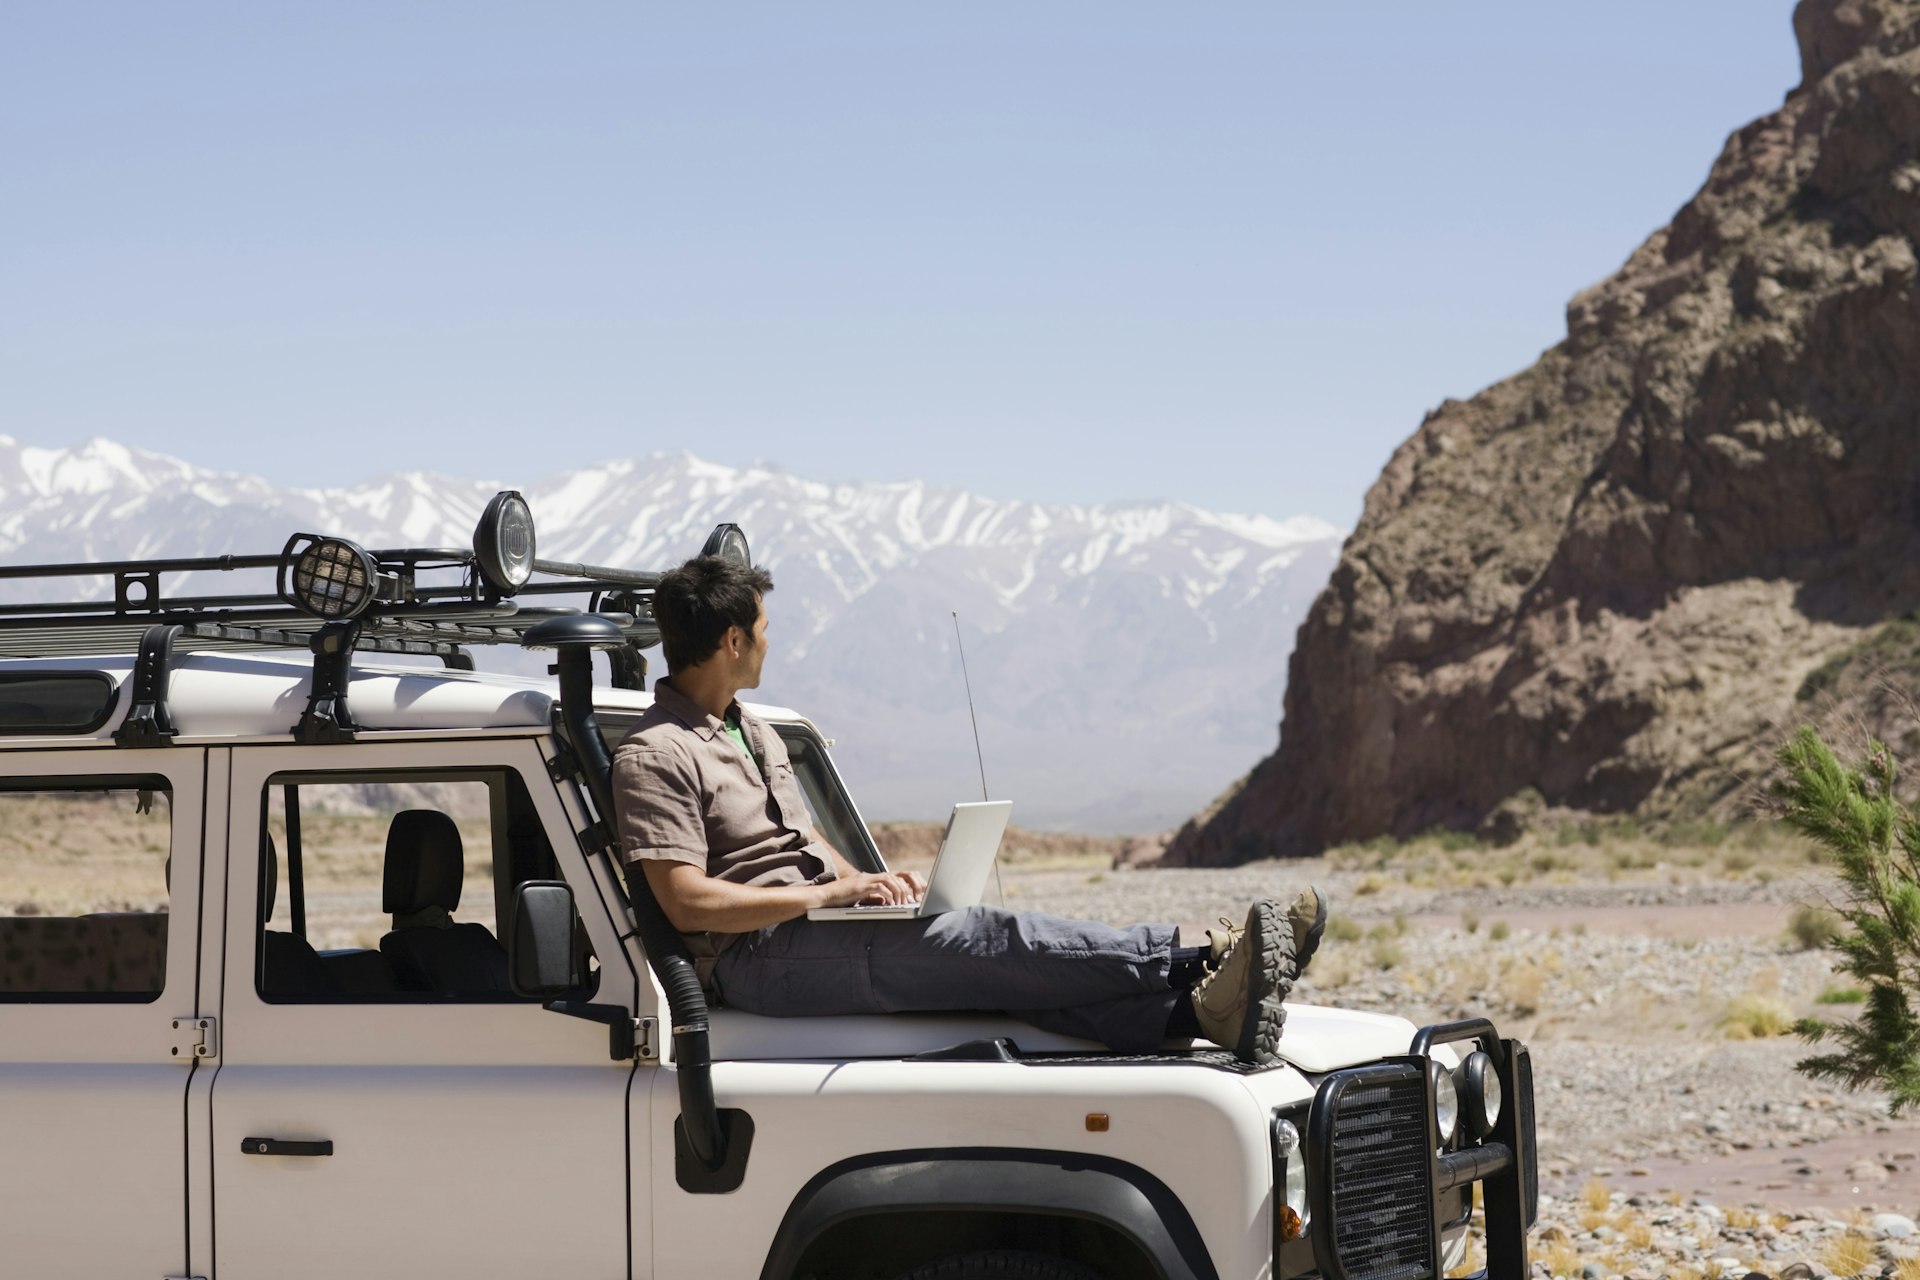 A person is perched on the hood of an off-road vehicle with a laptop, with a mountainous desert landscape in the background.